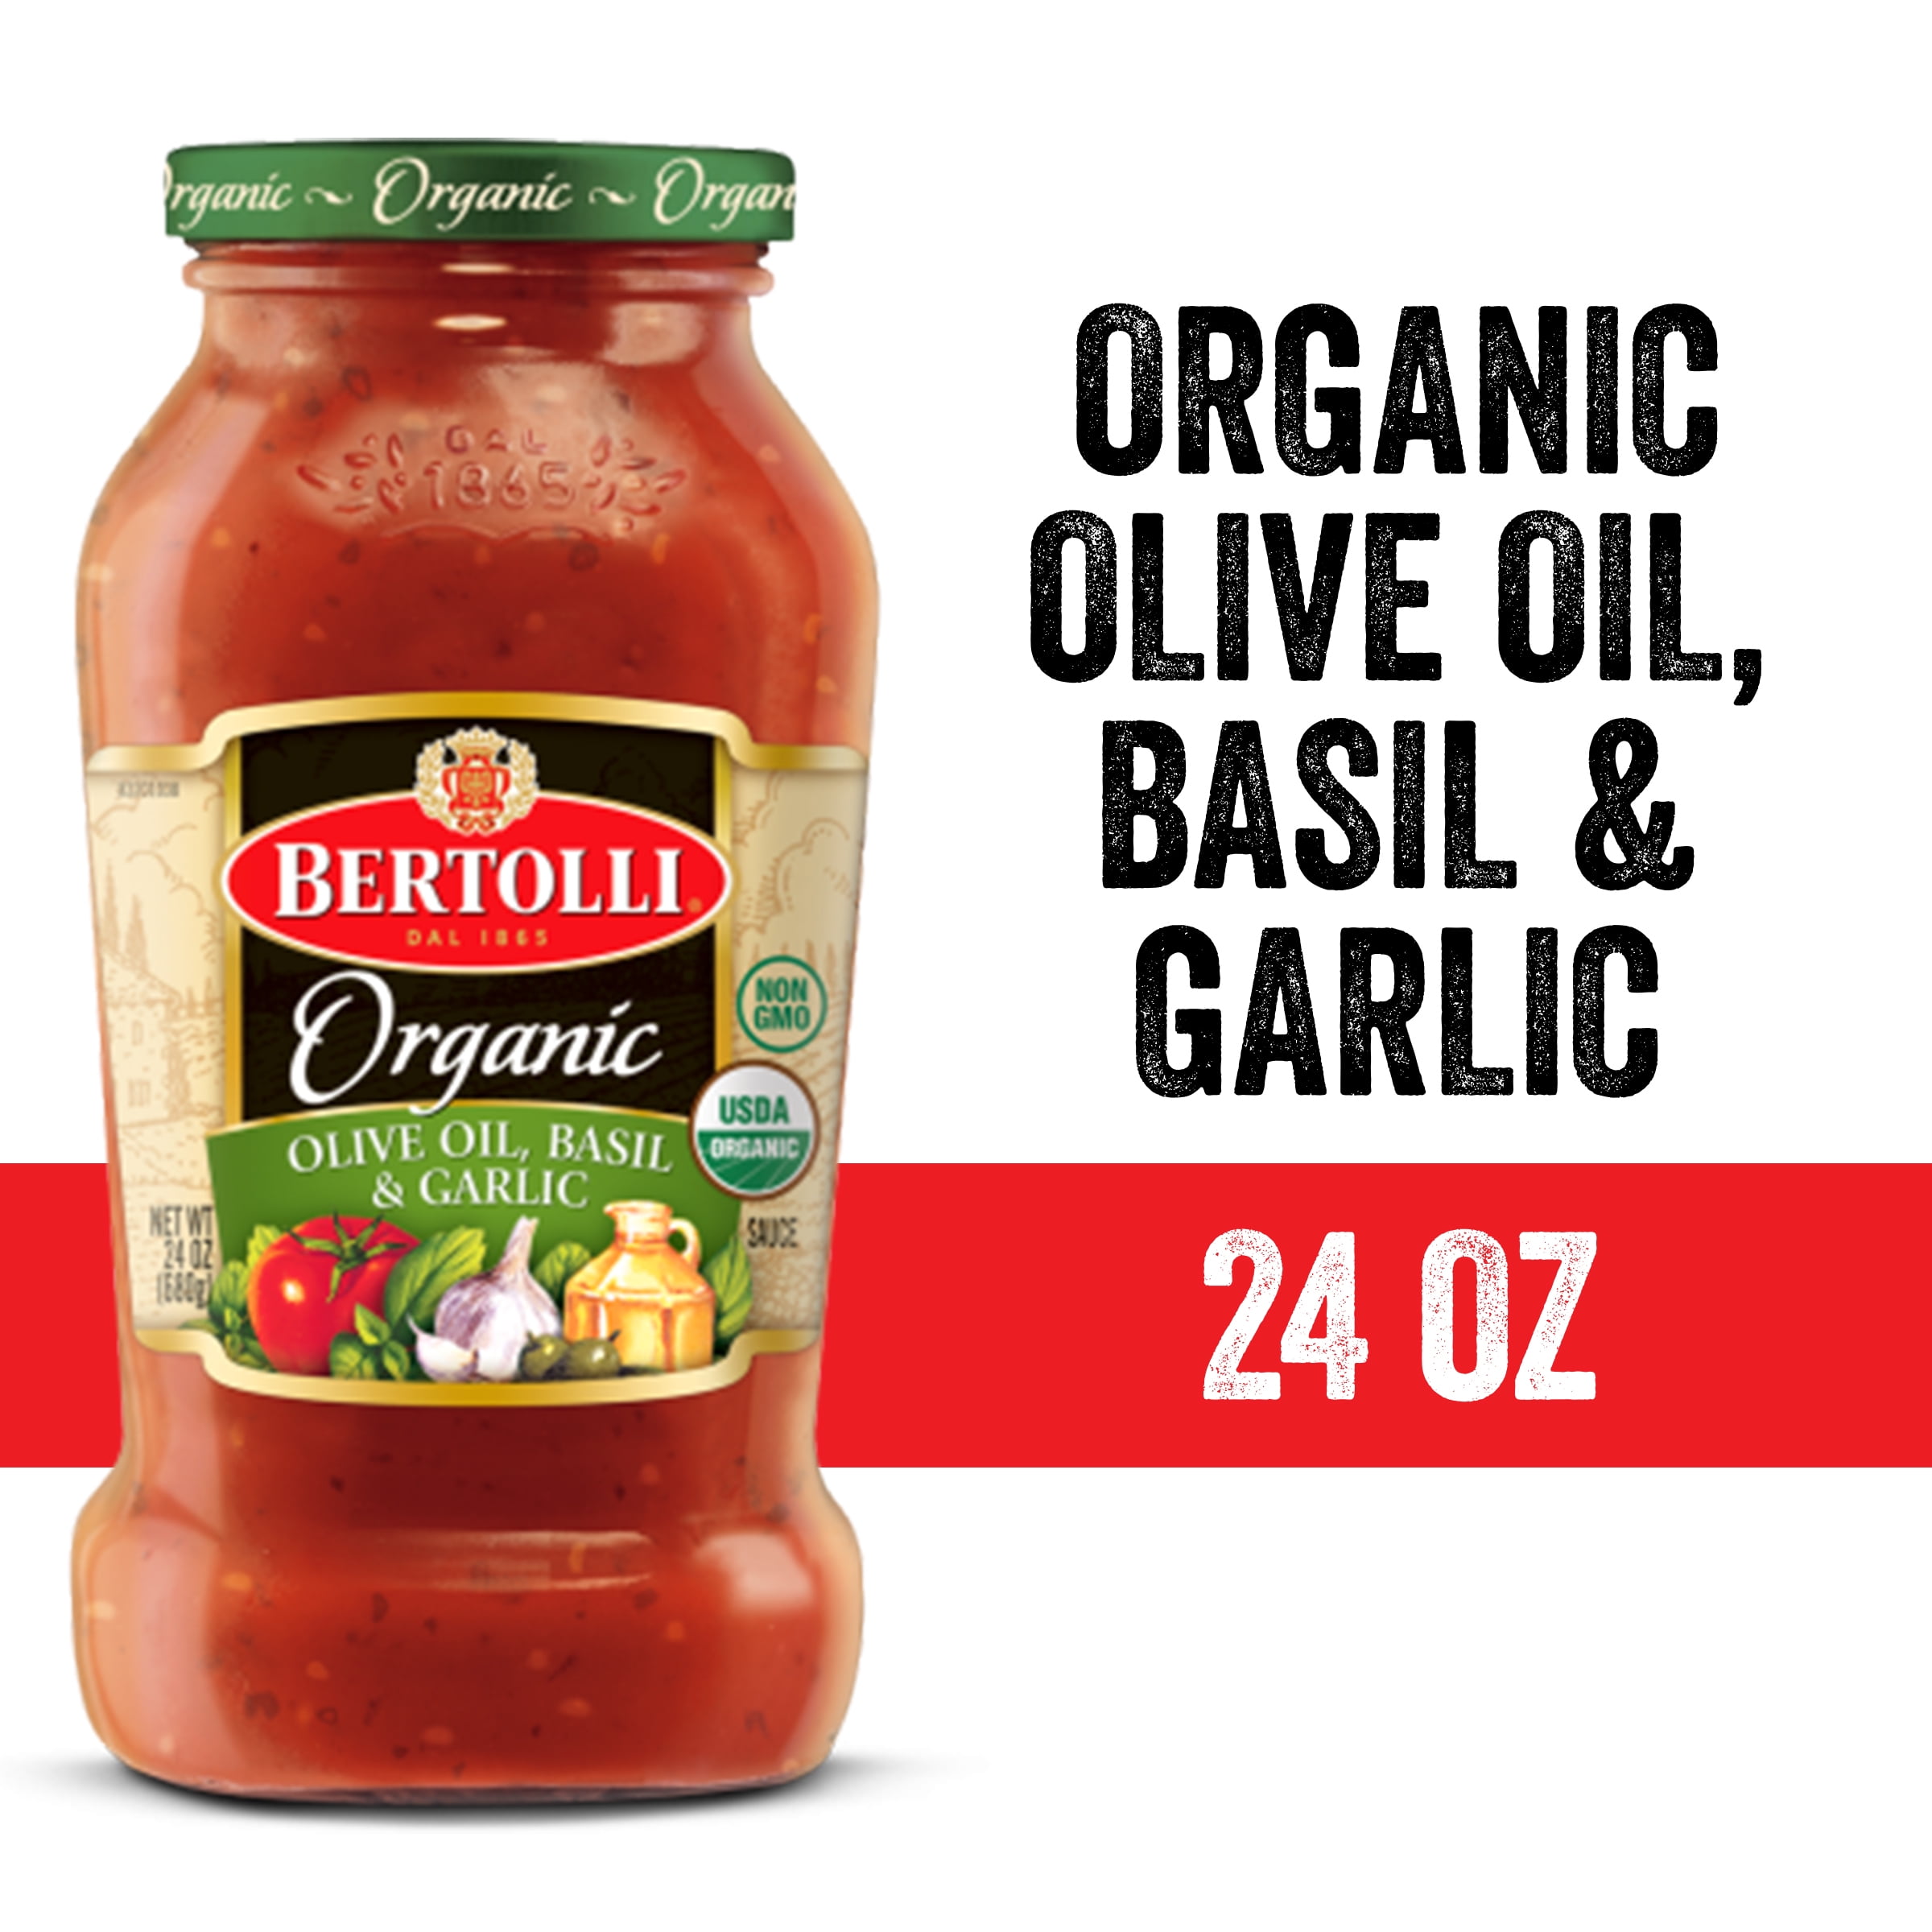 Bertolli Organic Olive Oil, Basil and Garlic Sauce, Authentic Tuscan Style Organic Pasta Sauce Made with Vine-Ripened Tomatoes, 24 OZ